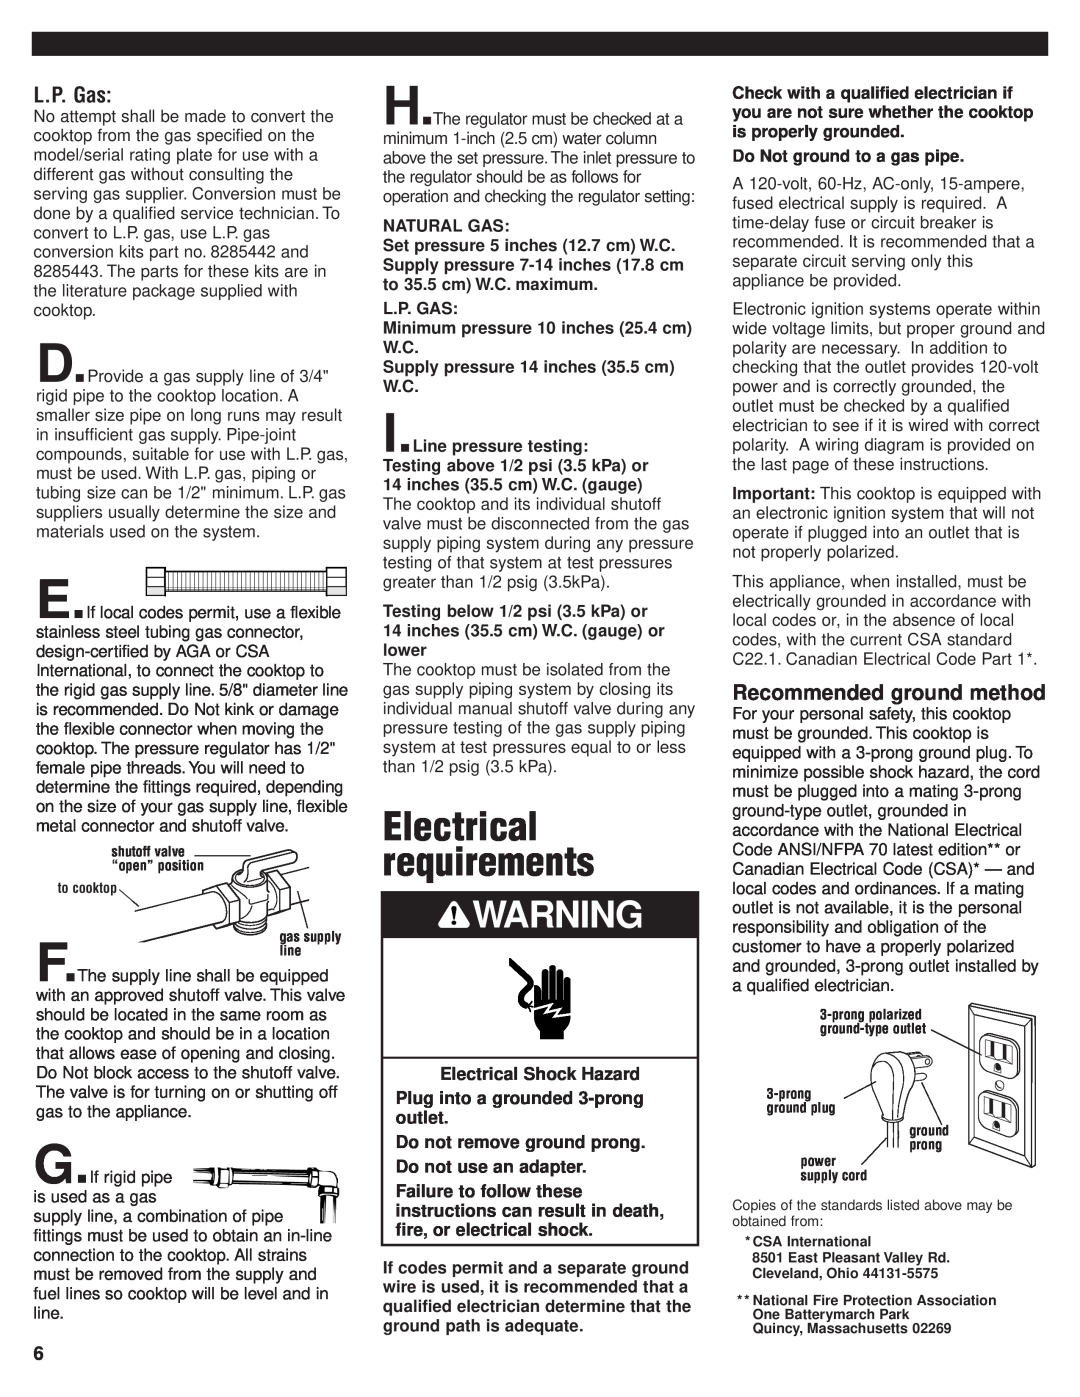 KitchenAid 8285418 installation instructions Electrical requirements, L.P. Gas, Recommended ground method 